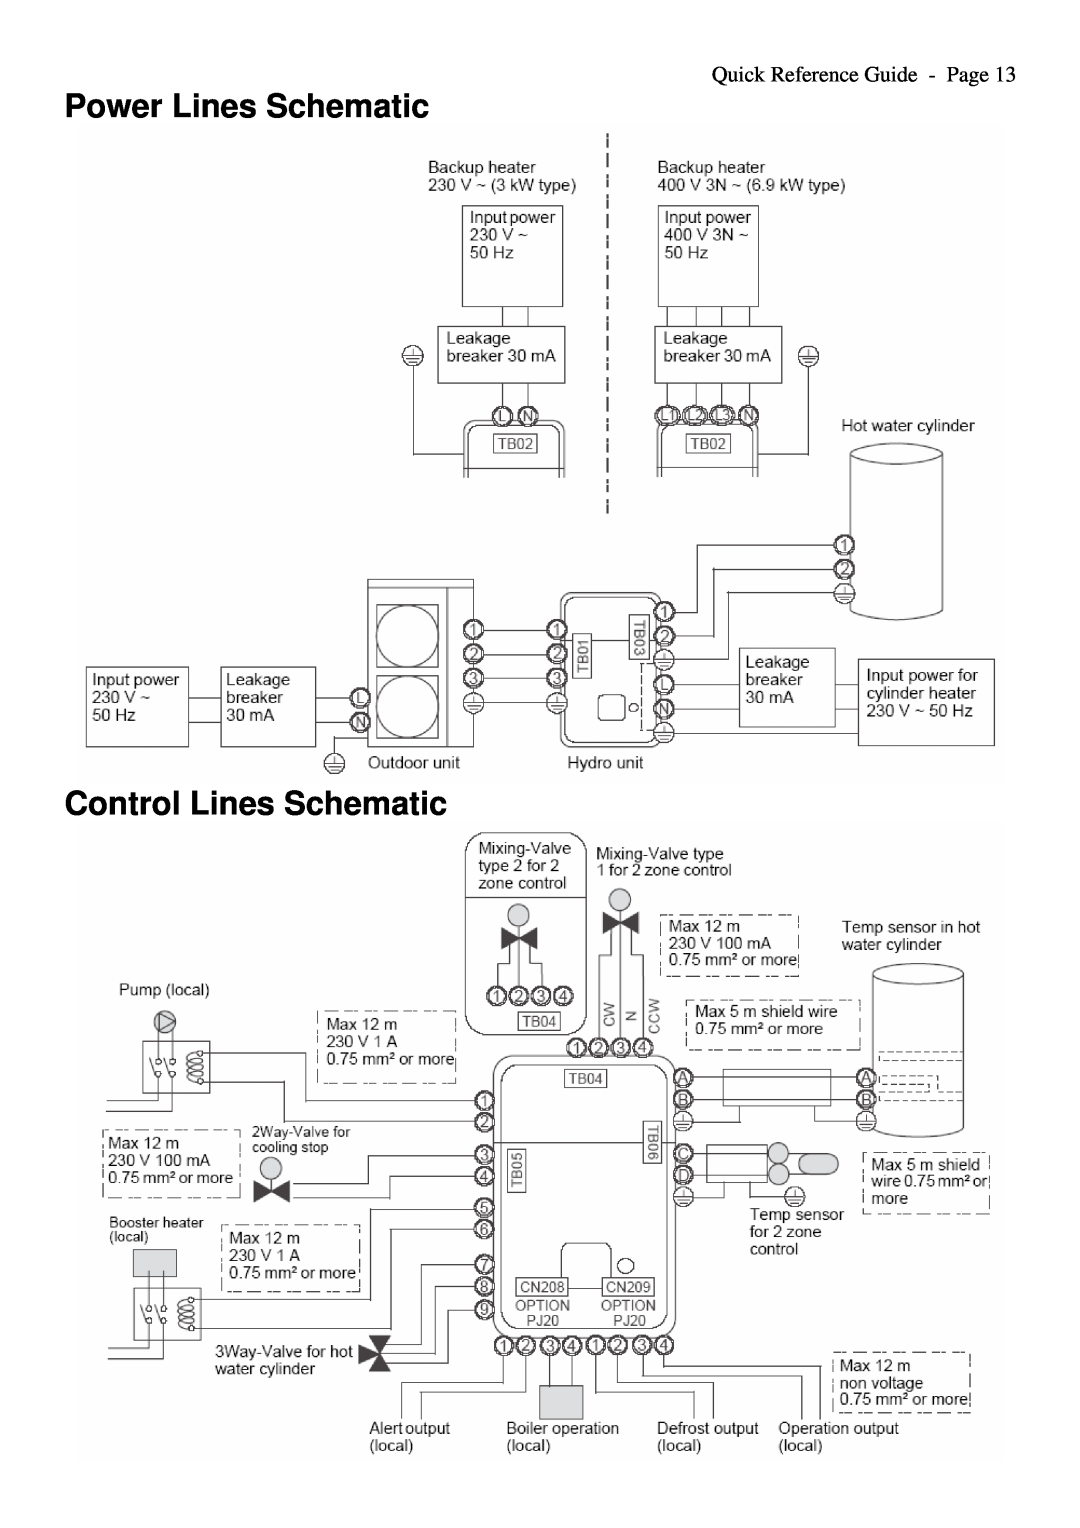 Toshiba A09-01P manual Power Lines Schematic Control Lines Schematic, Quick Reference Guide - Page 